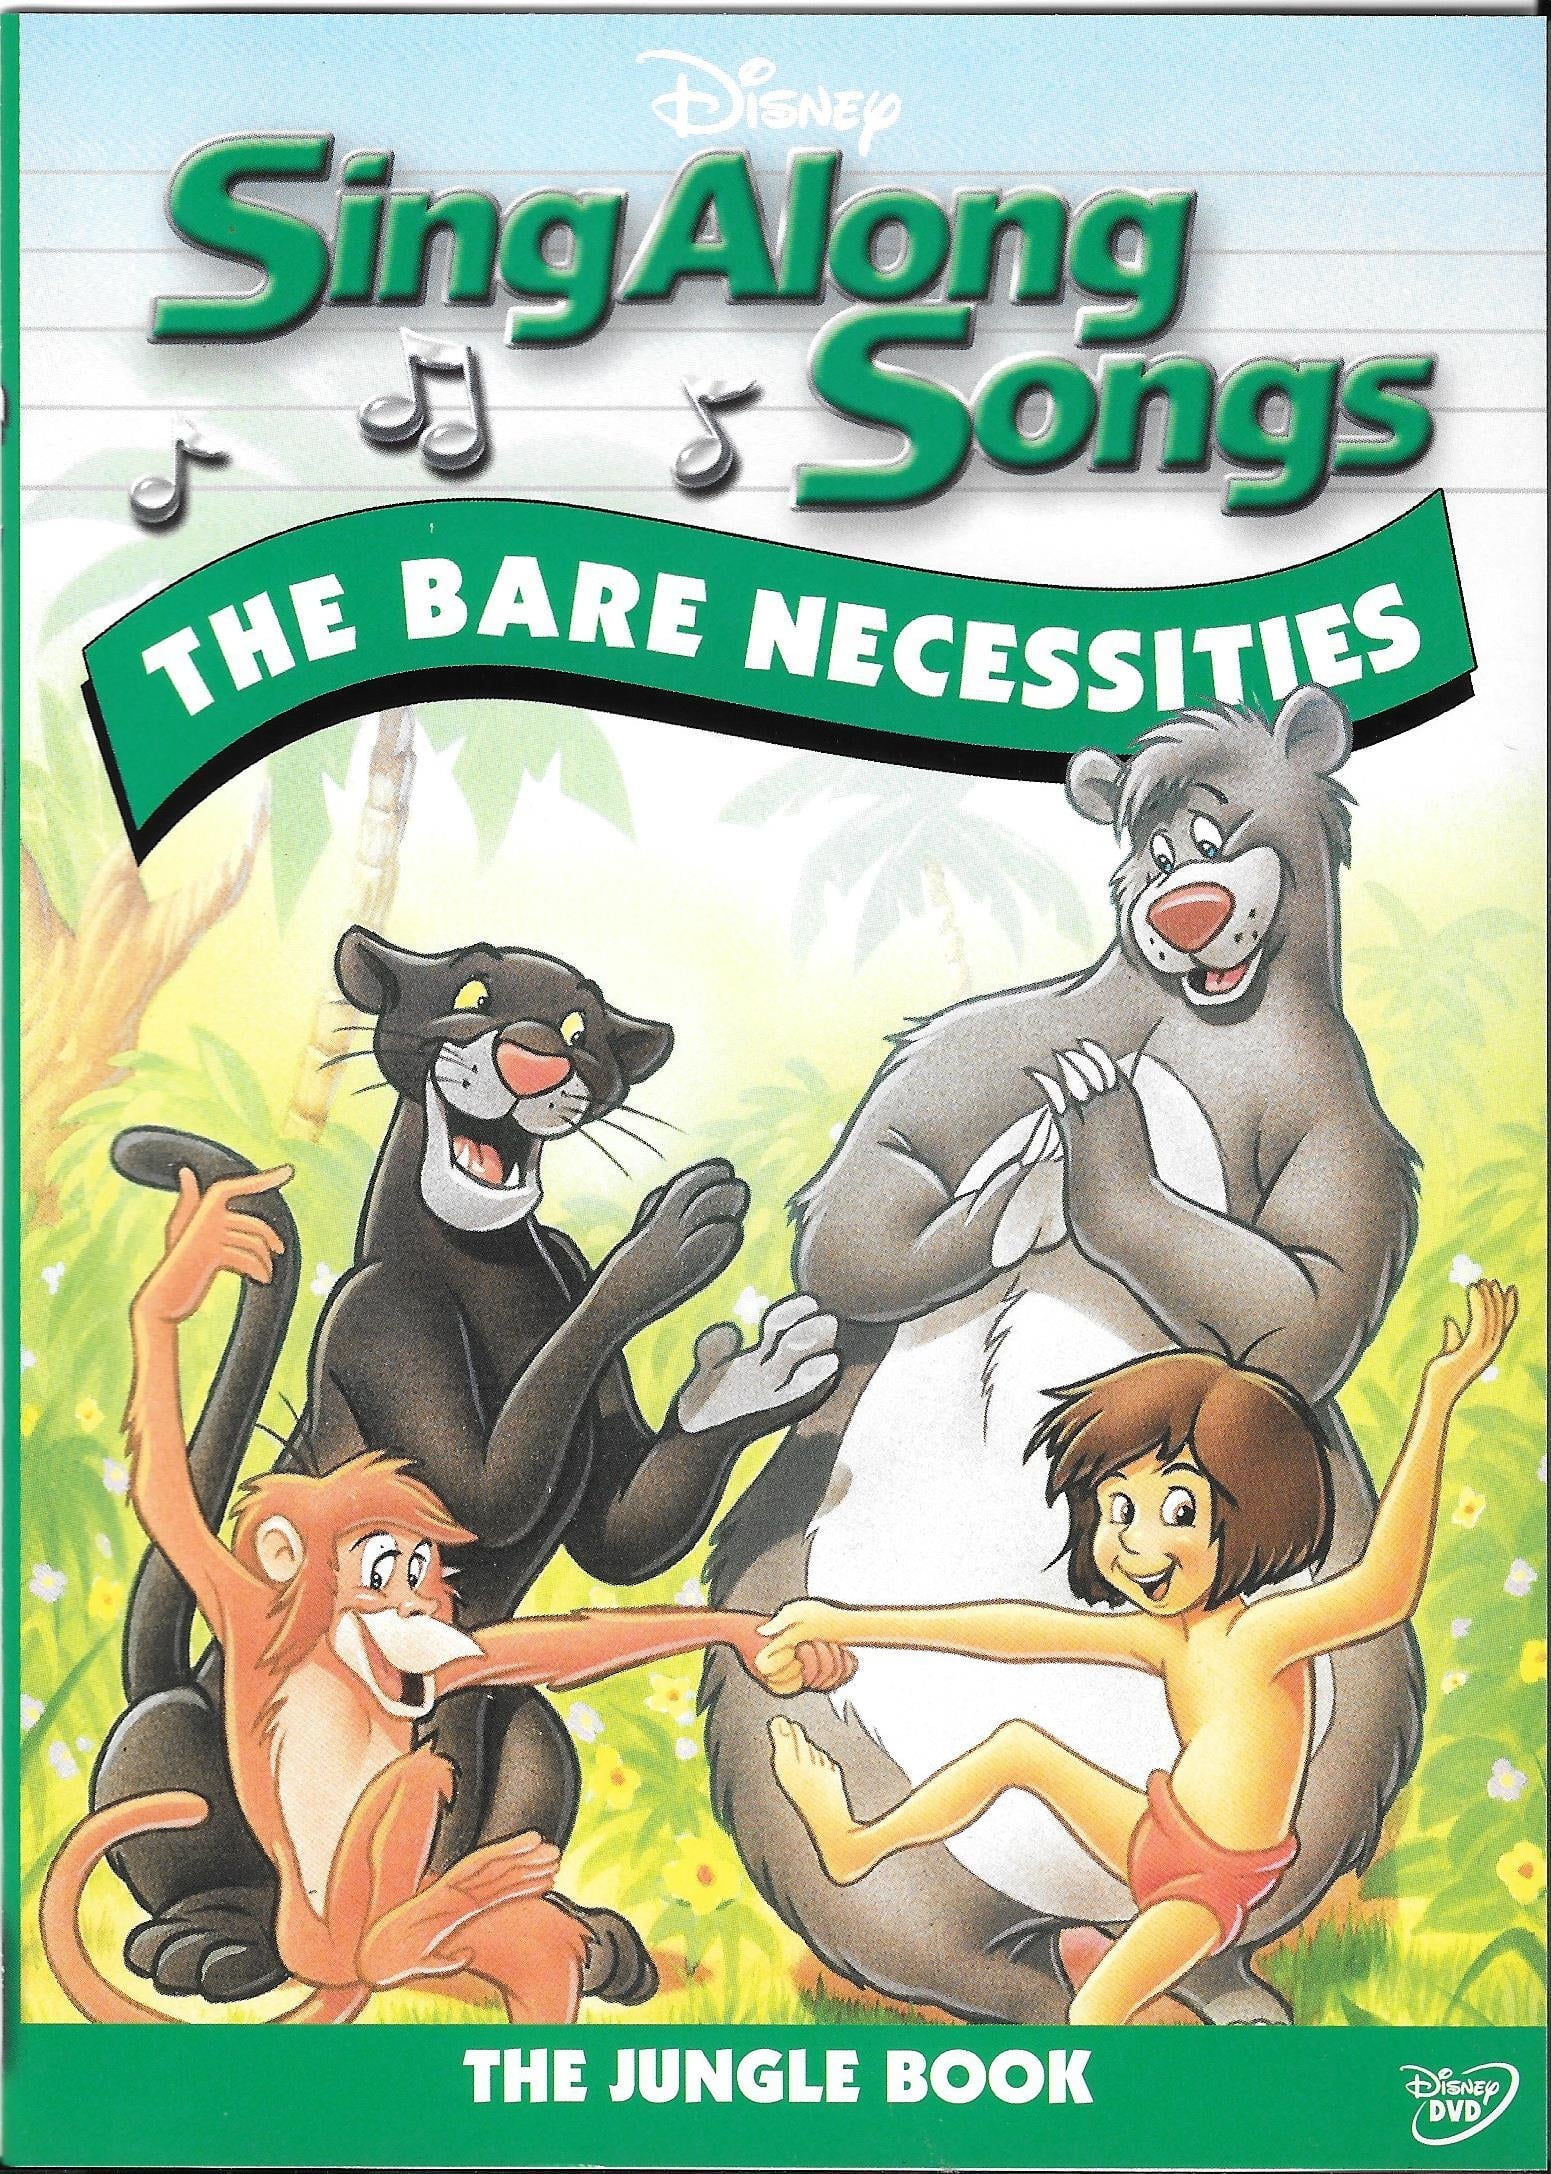 Disney Sing-Along Songs: The Bare Necessities